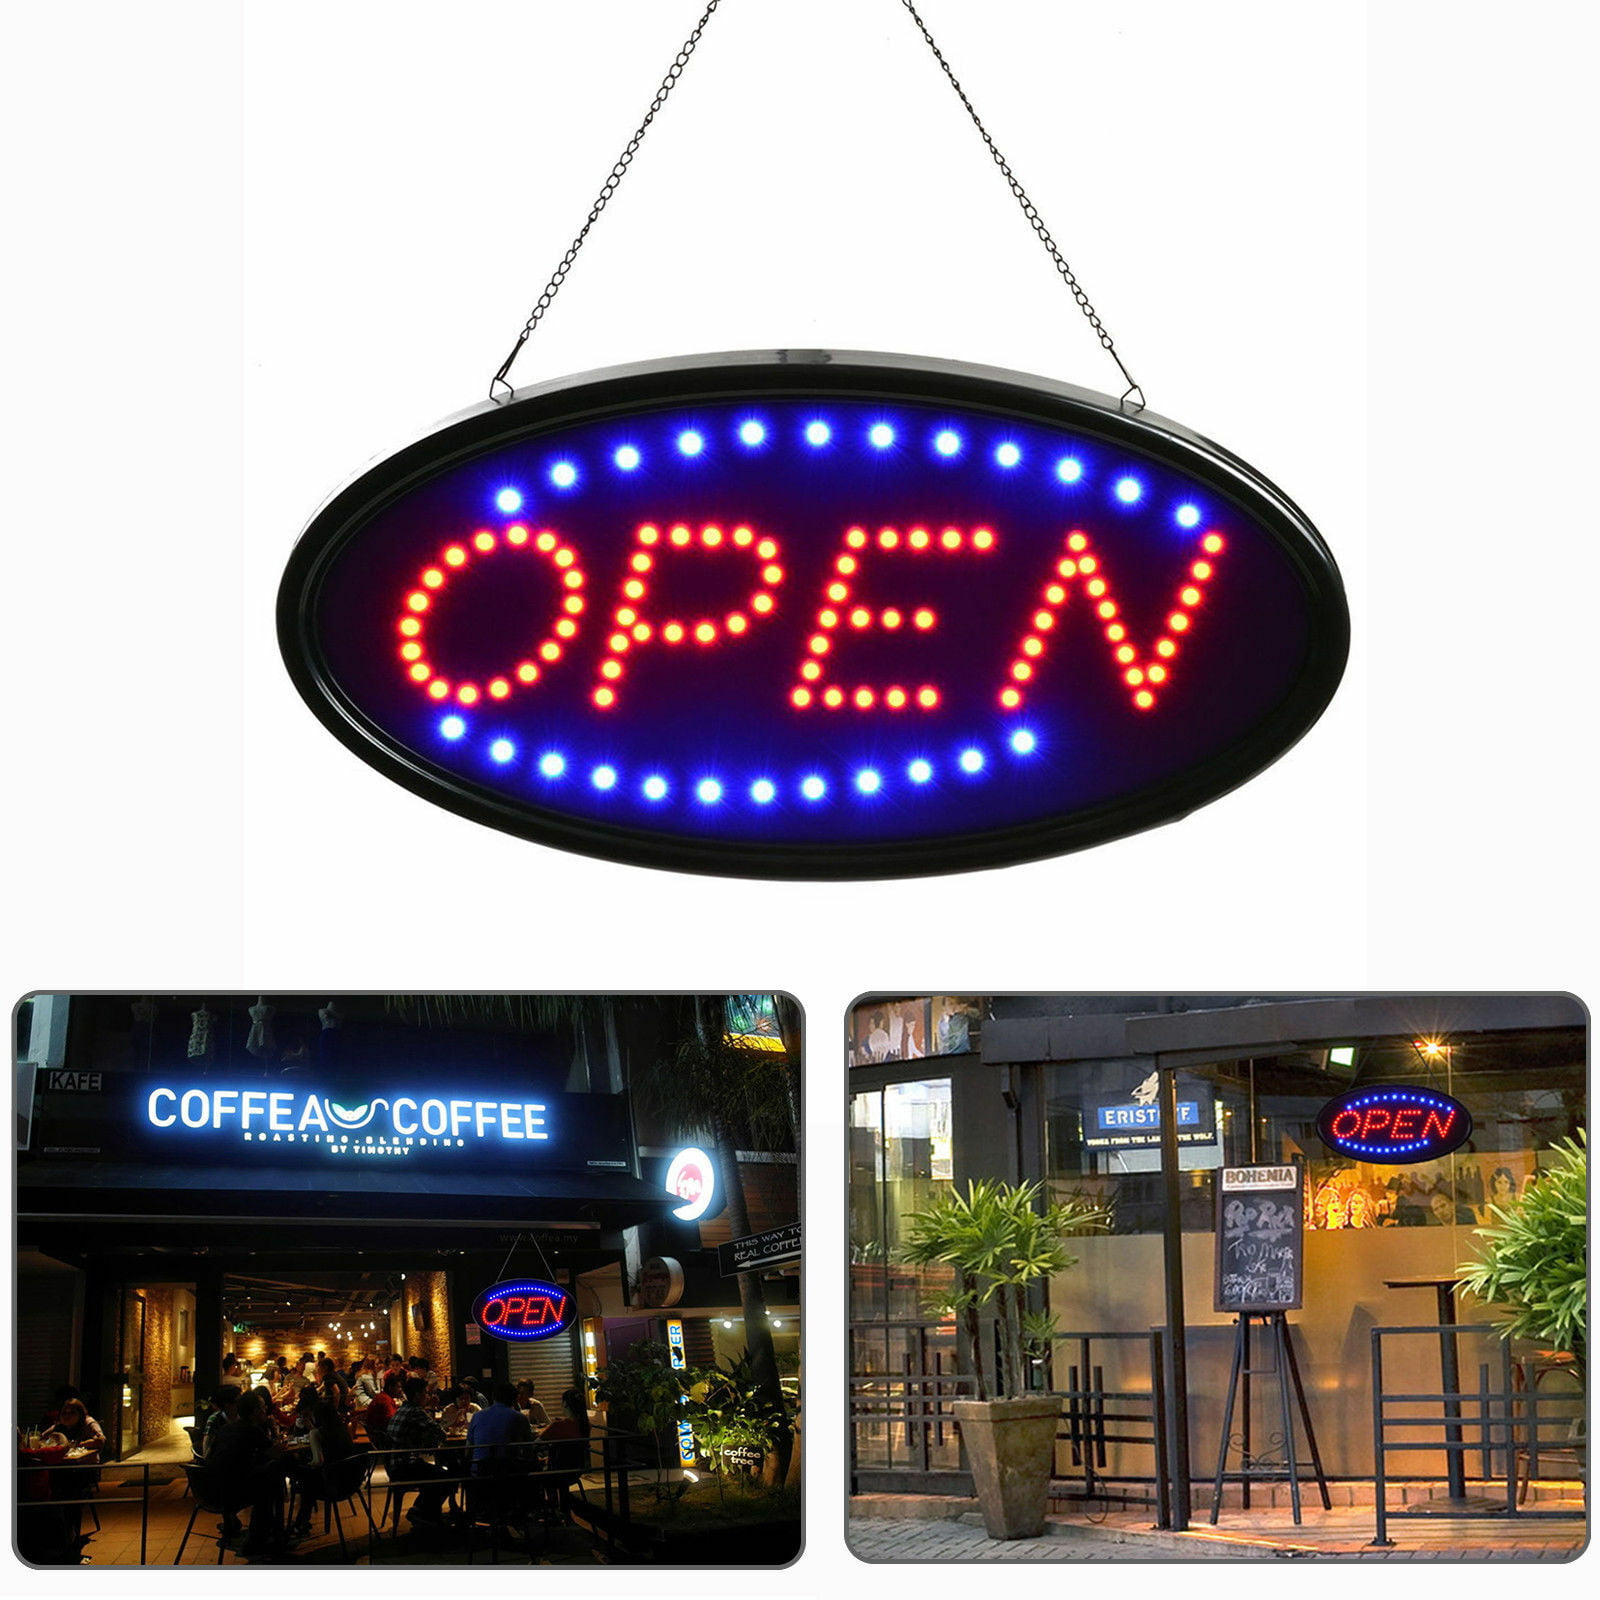 ULTRA BRIGHT LED SHOP NEON DISPLAY FLASHING WELCOME OPEN NAIL COFFEE SIGN 